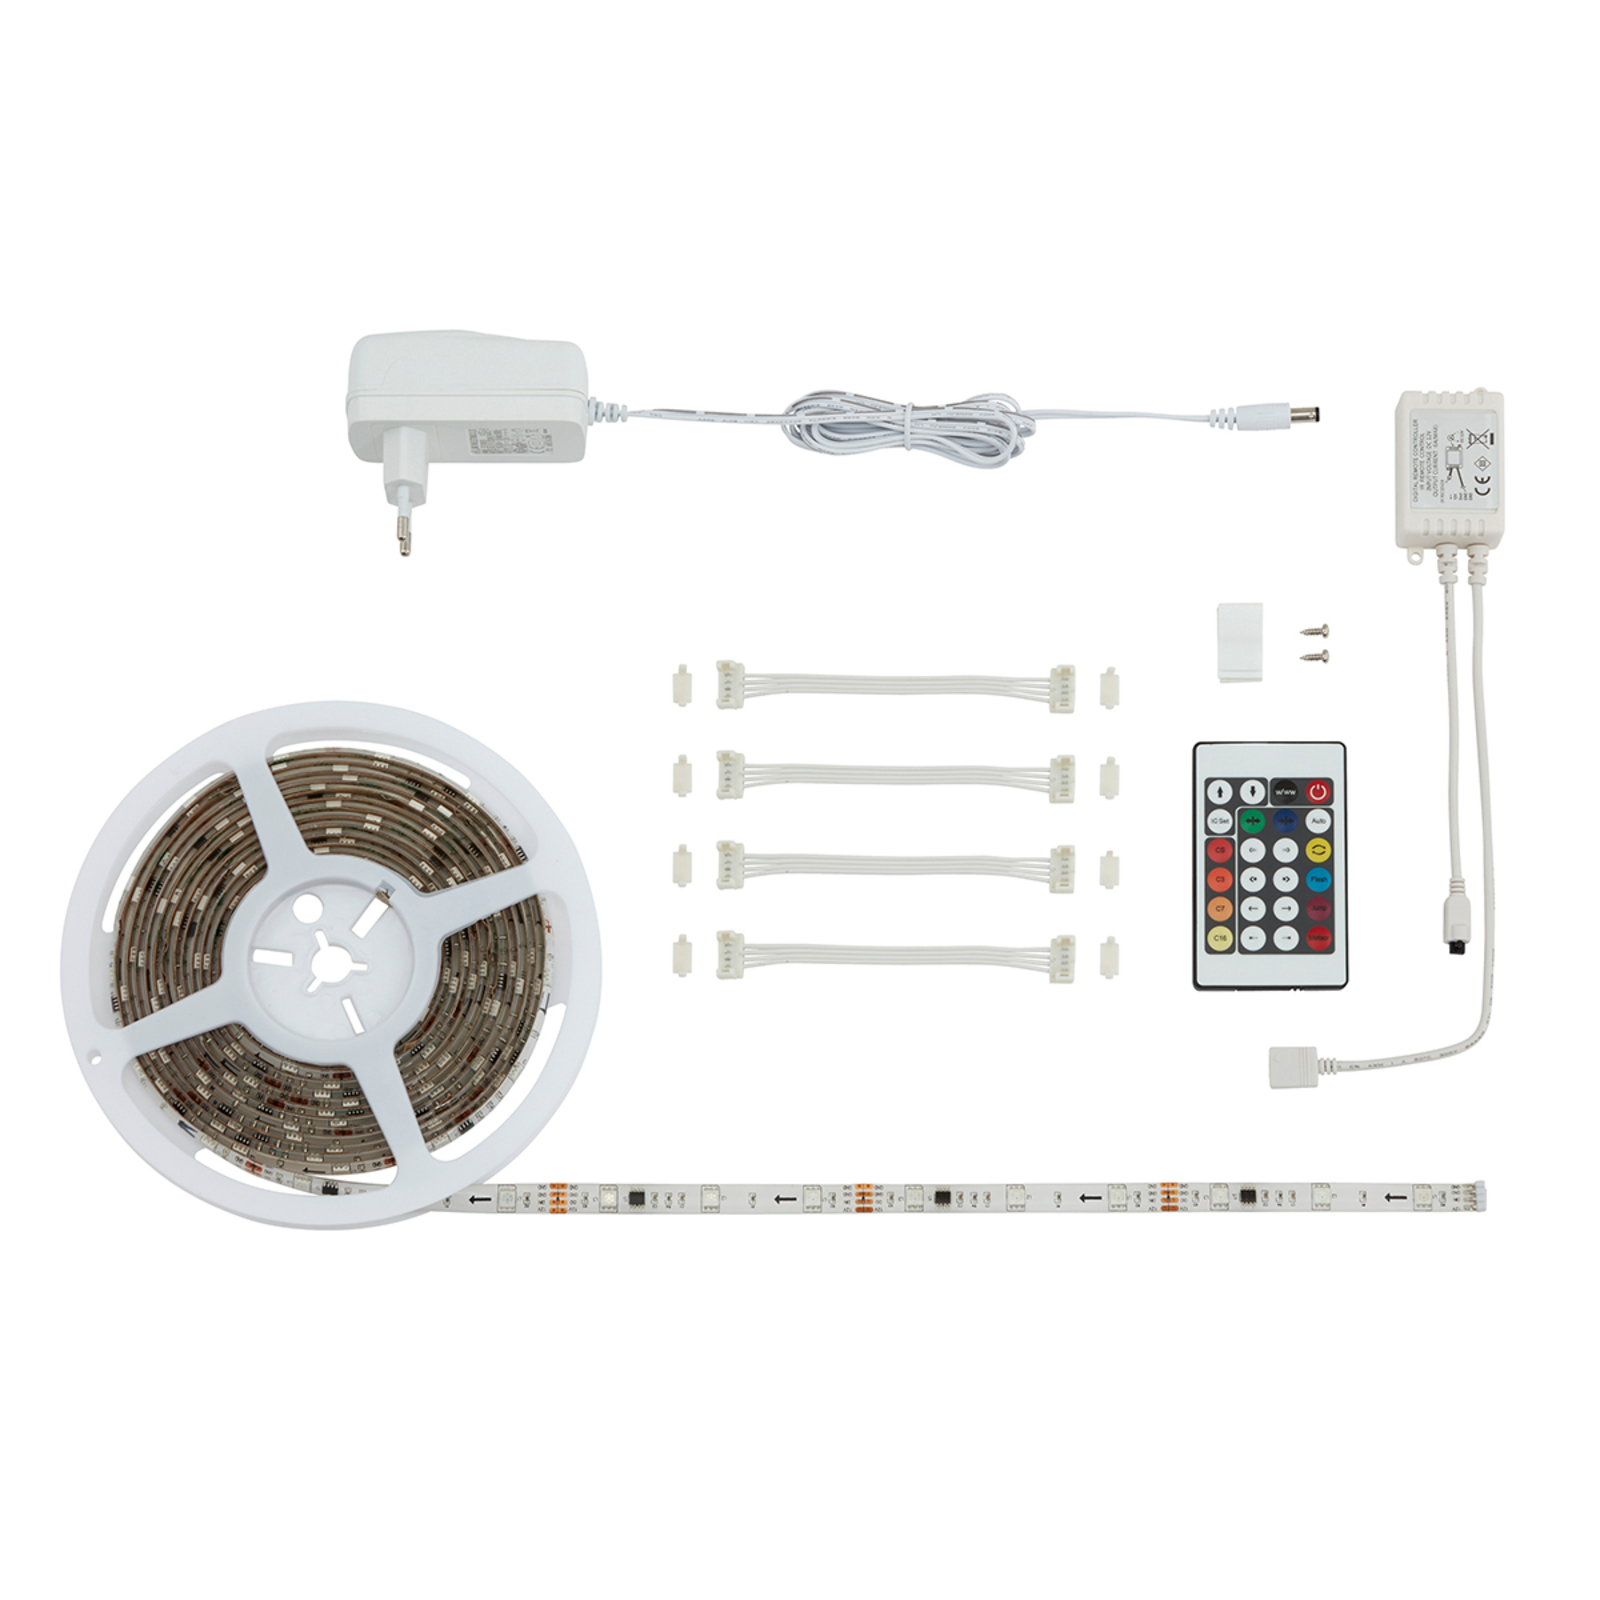 With 164 light functions - 500 cm Mo RGB LED strip